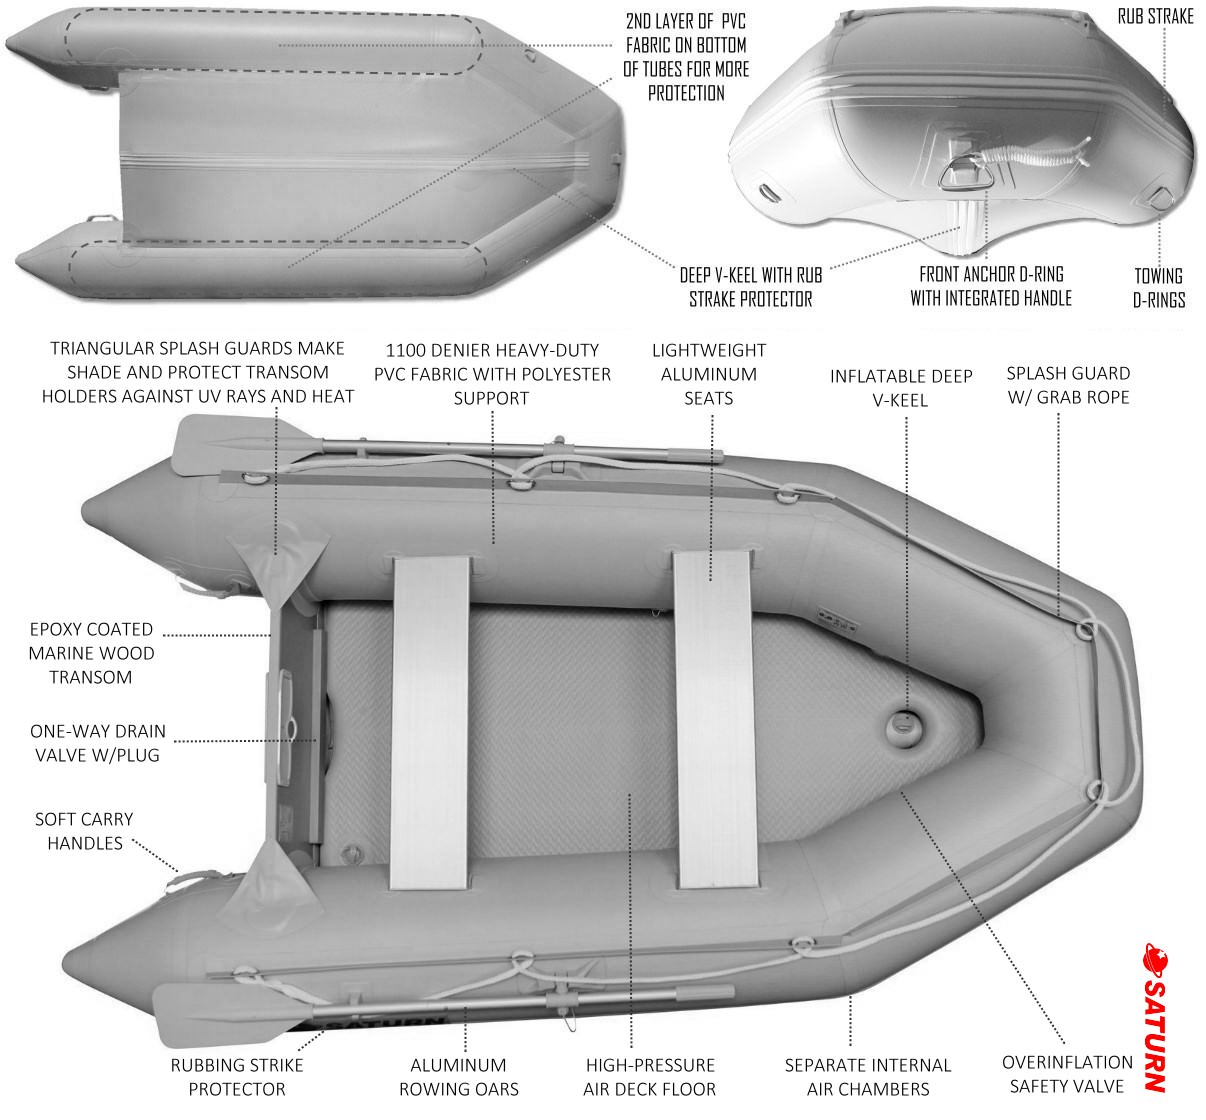 Best Selling Inflatable Boat in an Industry - Saturn 11' SD330